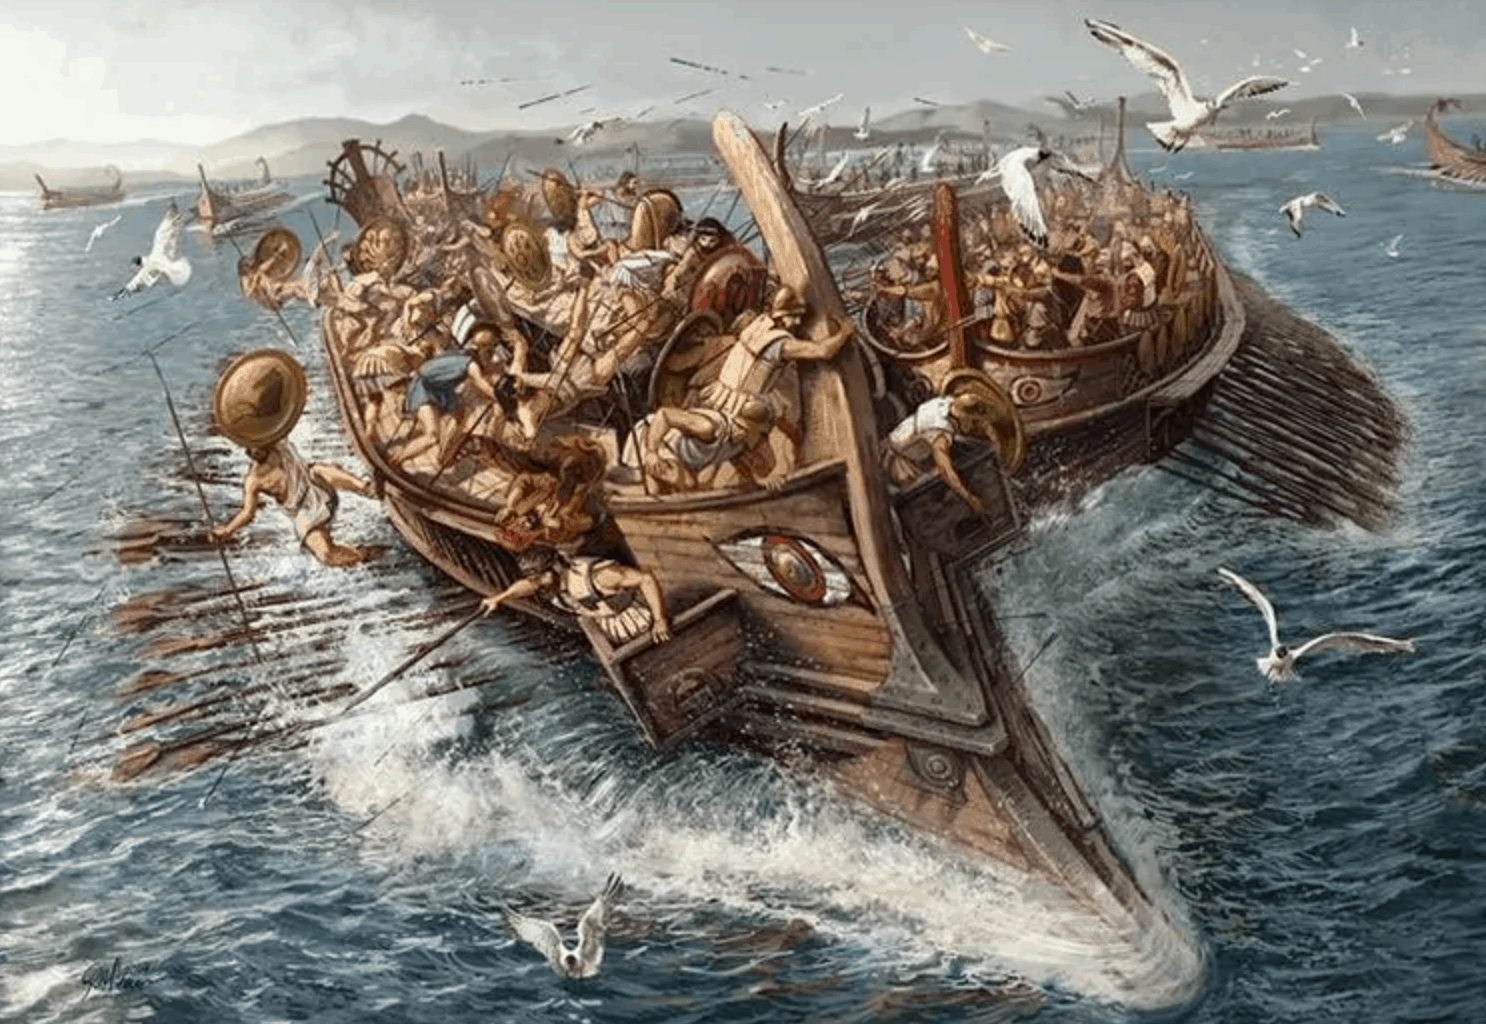 On this day in 480 BC, Greece wins the Battle of Salamis